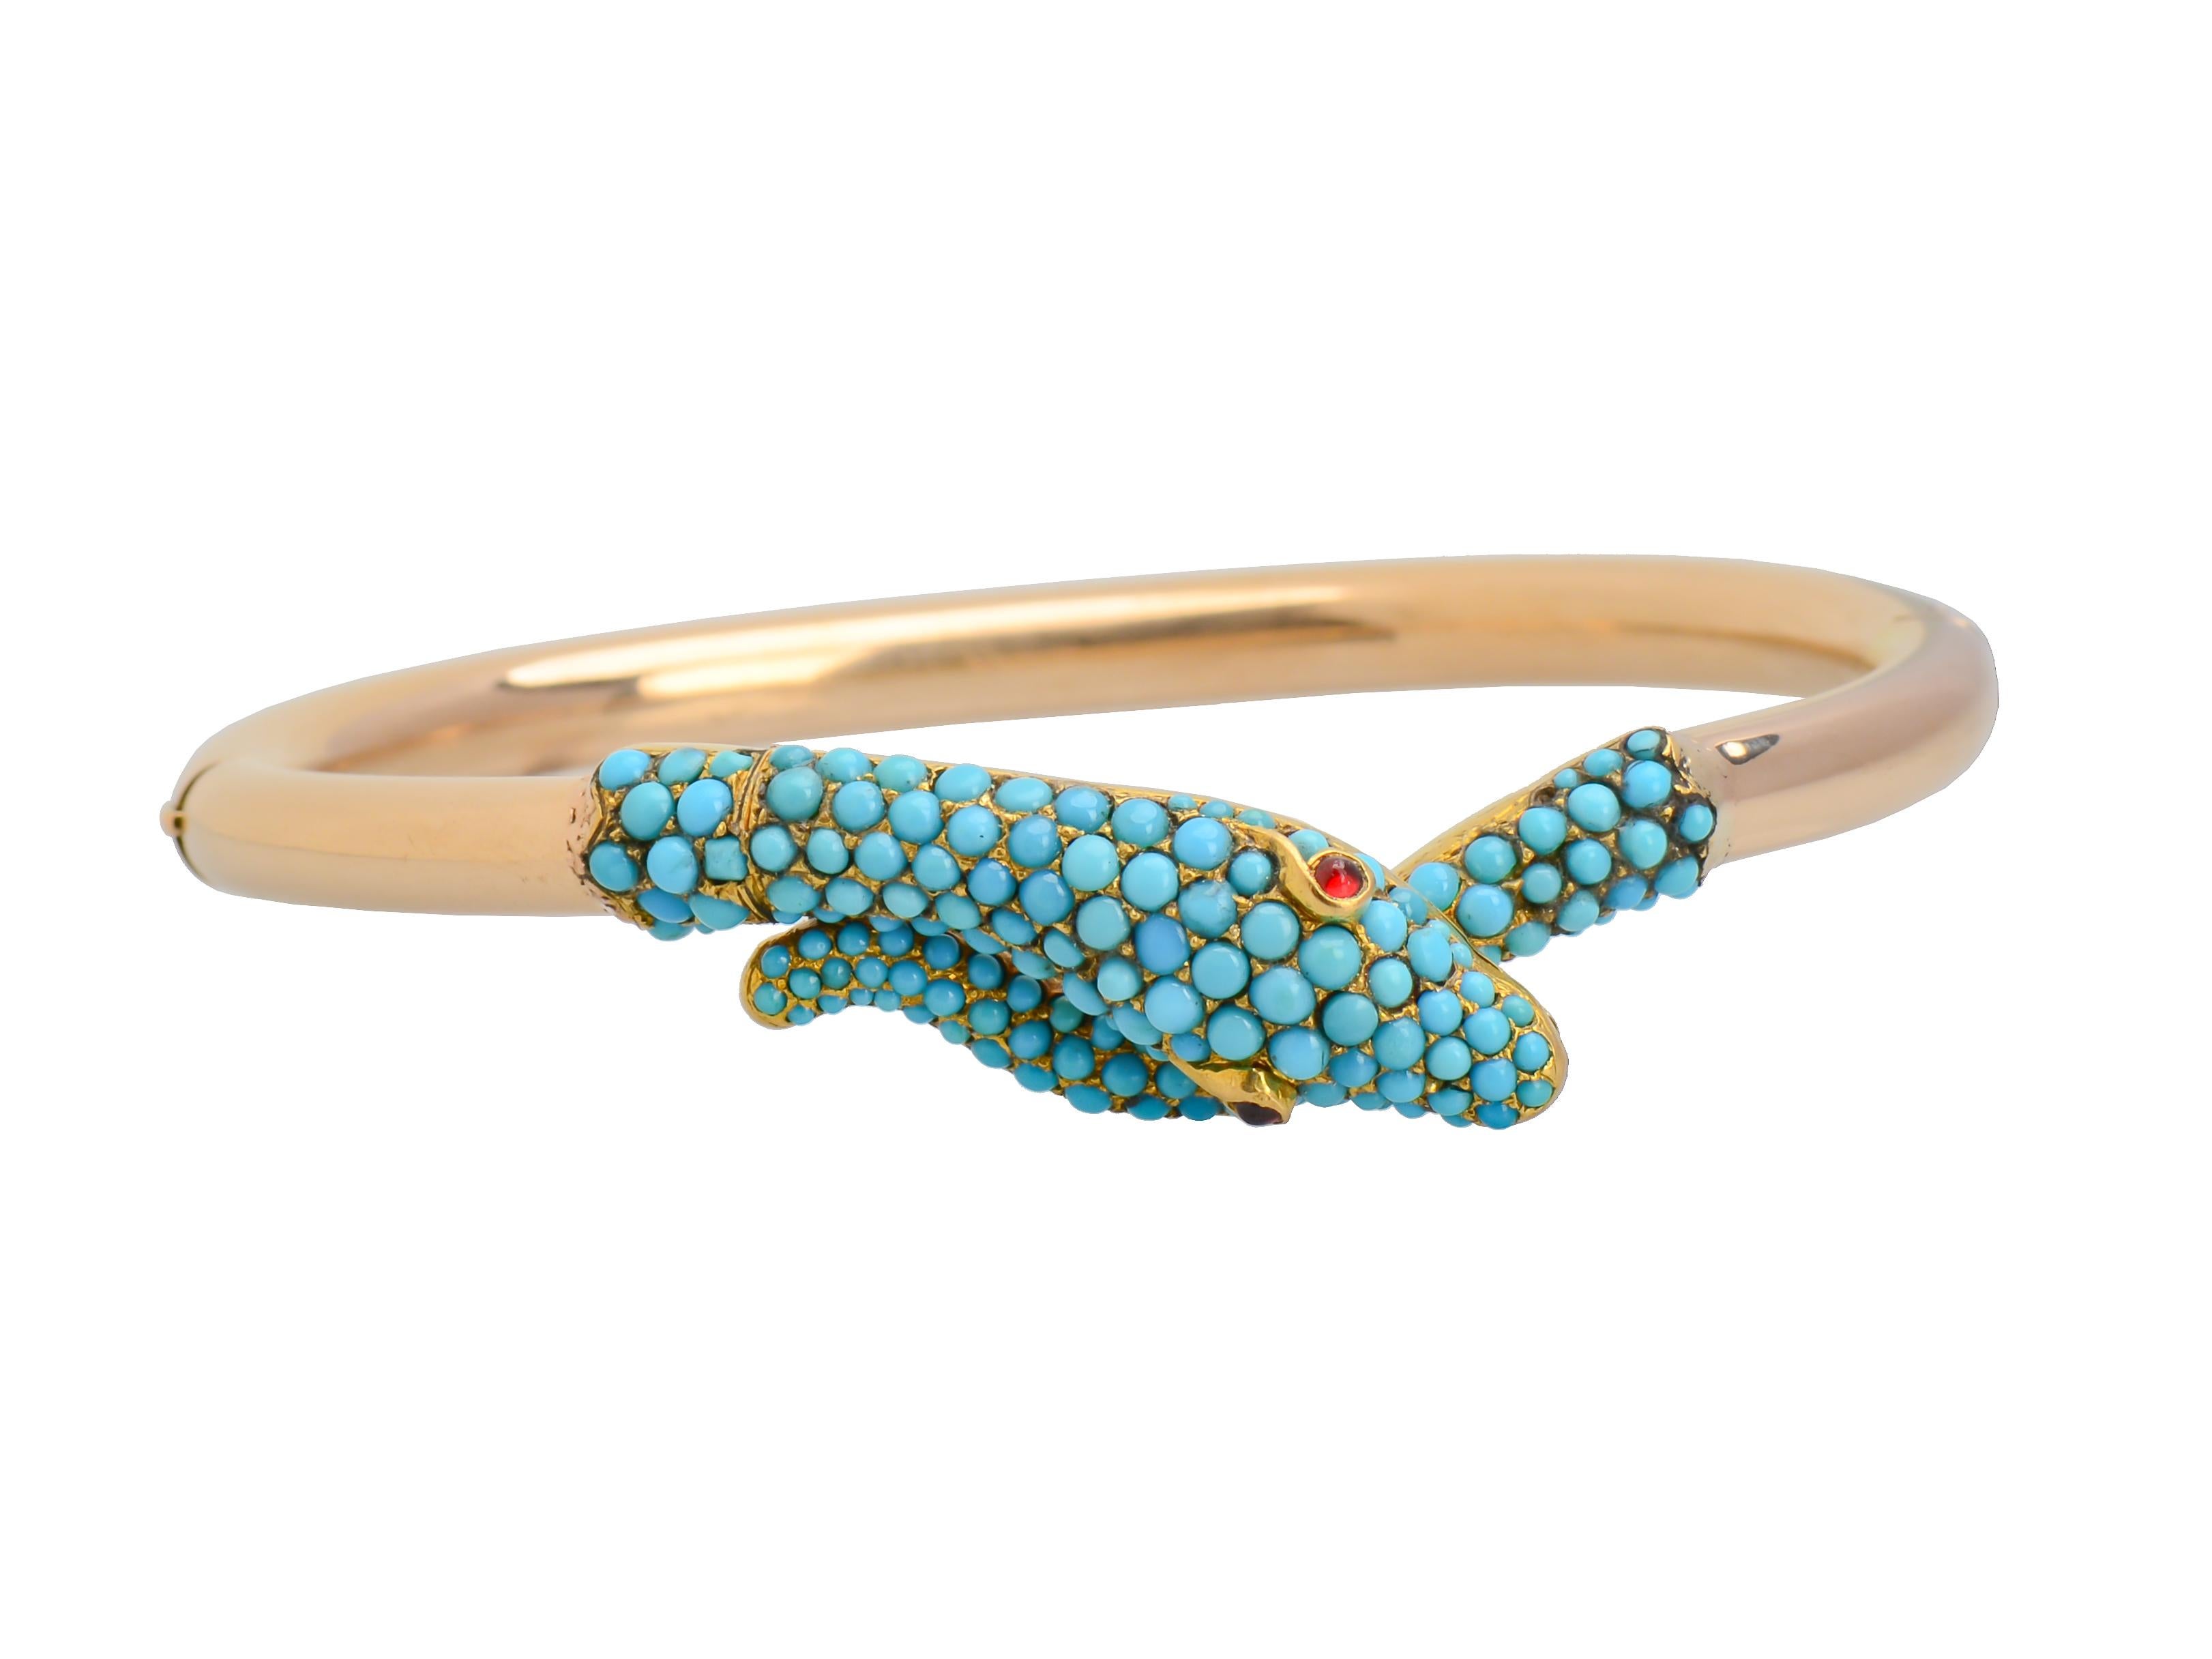 An astonishing serpent bracelet in 14 Kt gold, abundant in close set Persian turquoise finely hand crafted in Austria Hungary c. 1860. The bracelet is a rare beauty and surpasses the quality of most offered for sale today. I believe photographs